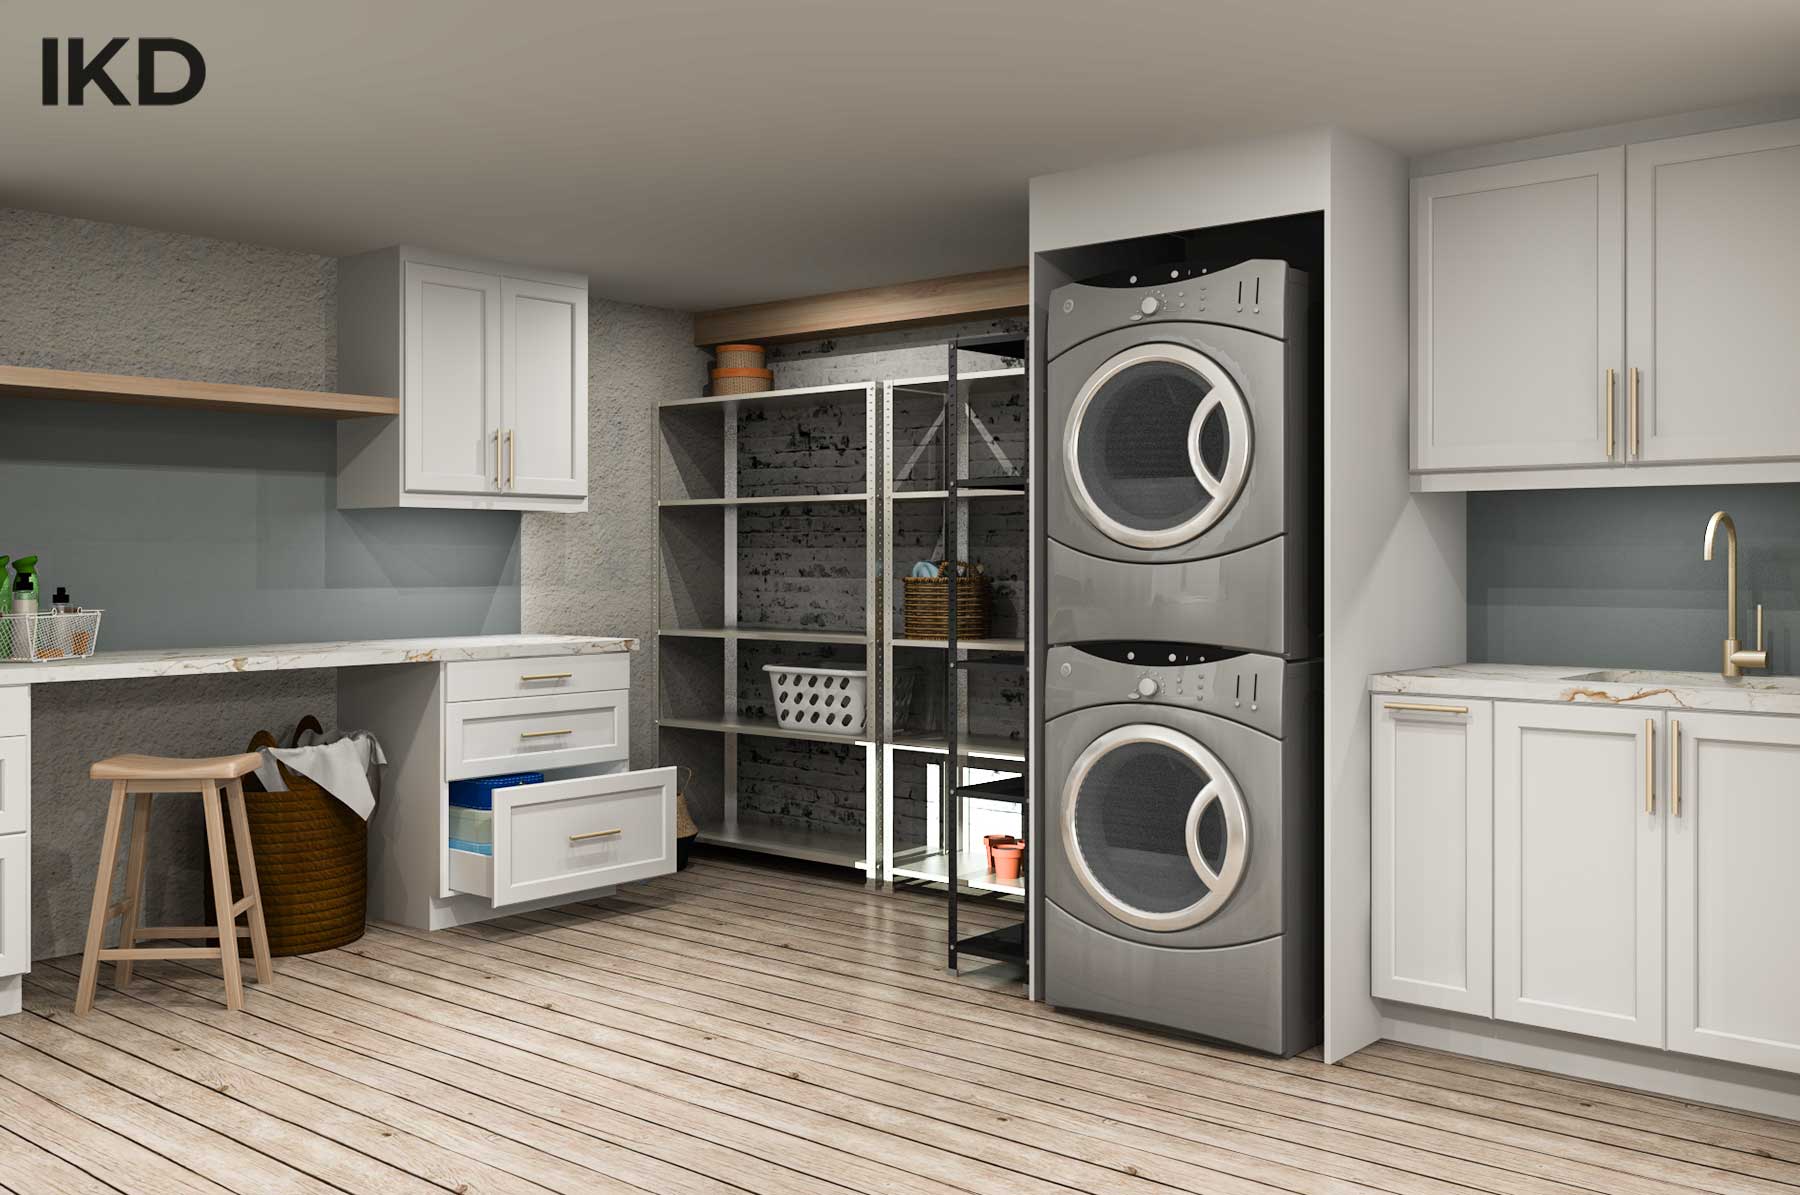 AXSTAD matt white, IKEA laundry room design with stacking washer and dryer